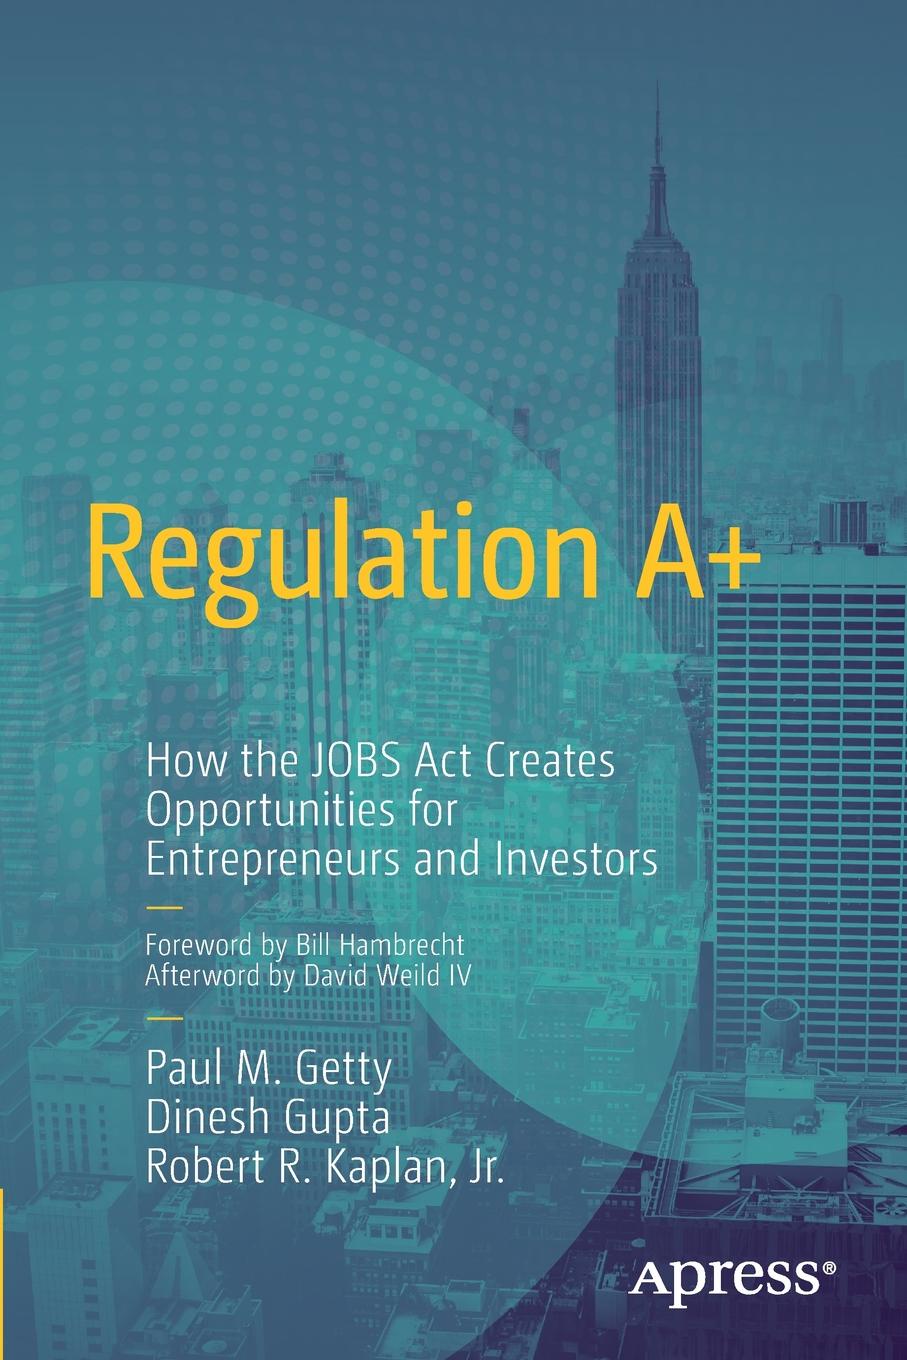 Regulation A+. How the JOBS Act Creates Opportunities for Entrepreneurs and Investors